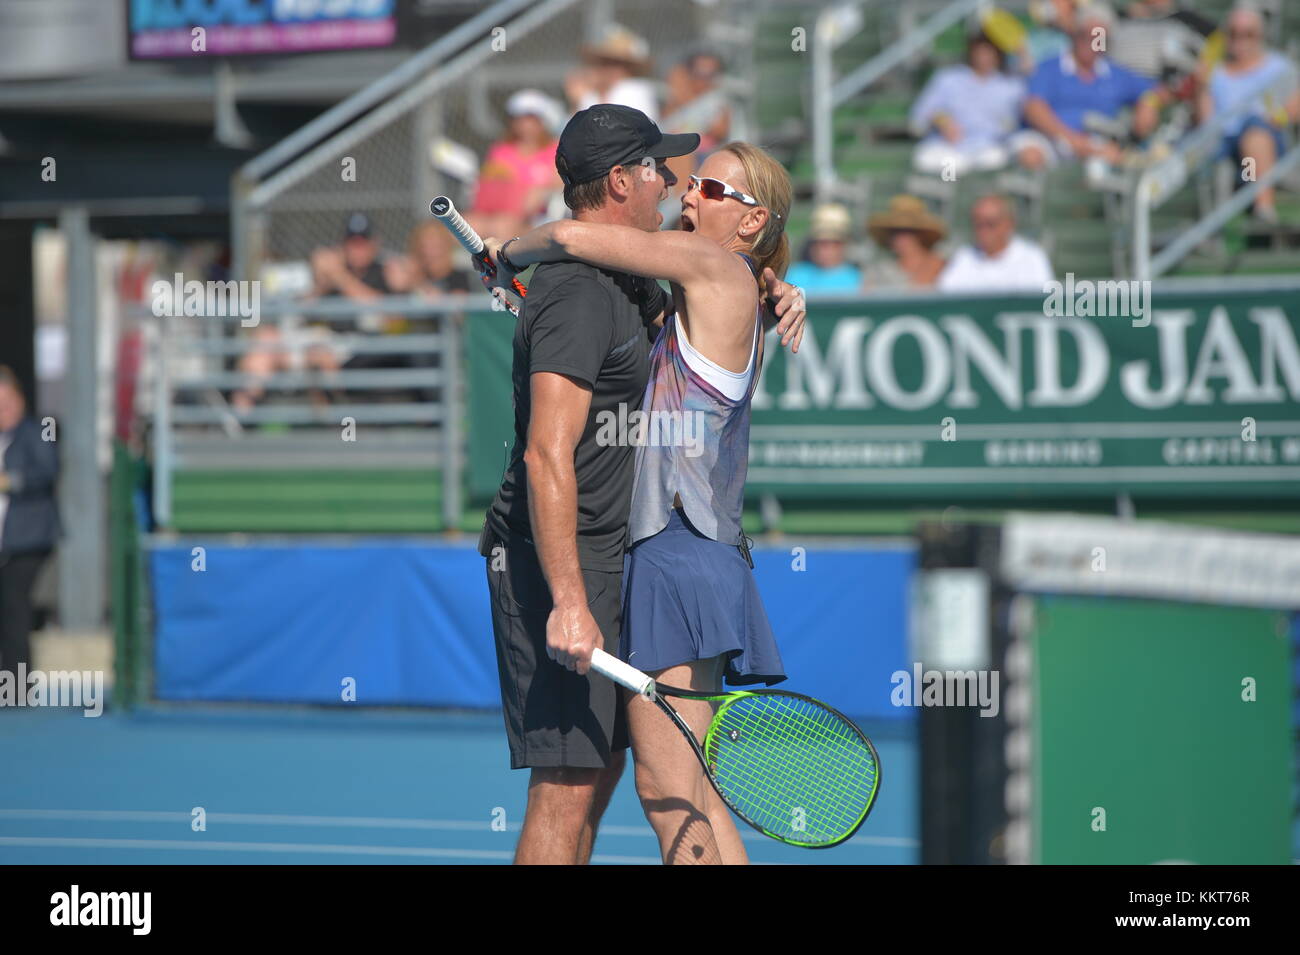 DELRAY BEACH, FL - NOVEMBER 05: Scott Foley and Renee Stubbs participates  in the 28th Annual Chris Evert/Raymond James Pro-Celebrity Tennis Classic  at Delray Beach Tennis Center on November 5, 2017 in